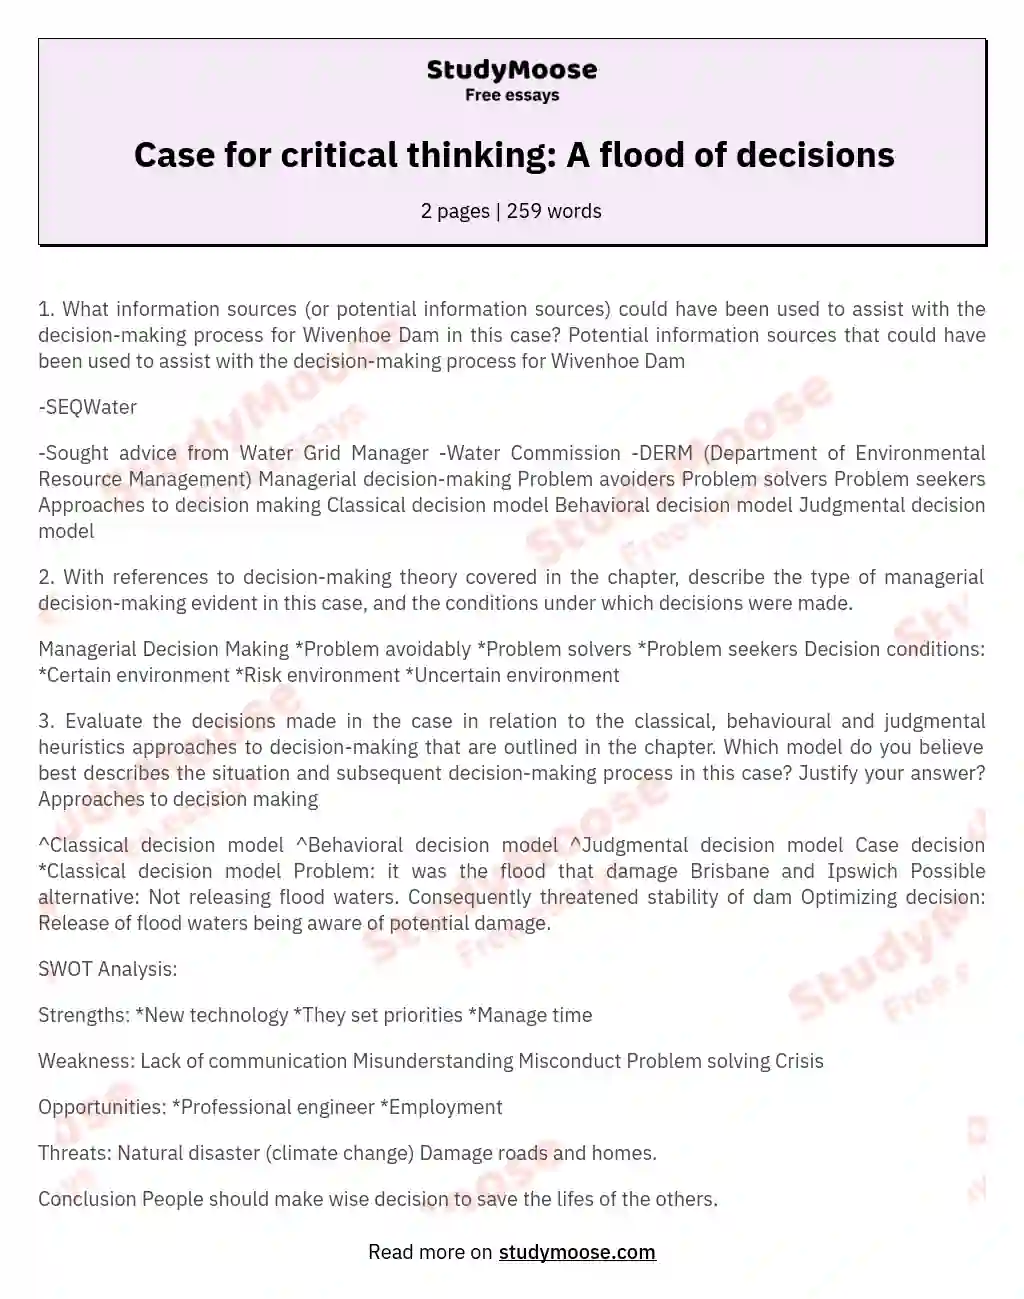 Case for critical thinking: A flood of decisions essay